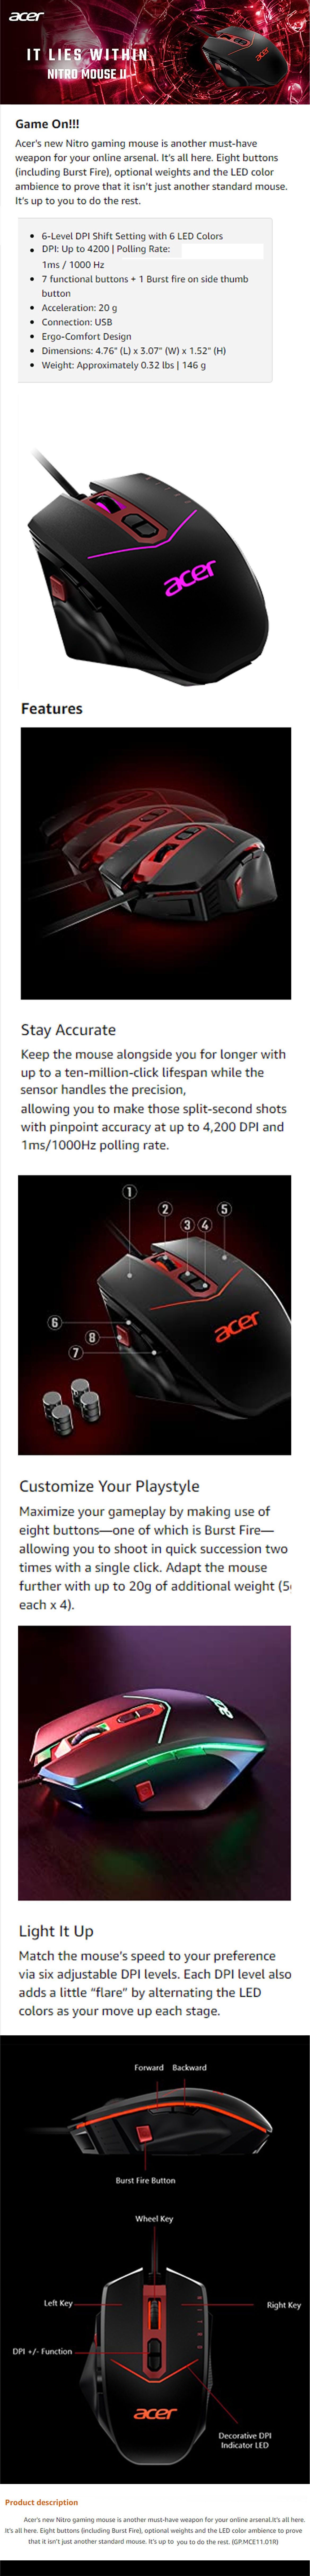 Acer-Nitro-NW120-Wired-Gaming-Mouse-Description